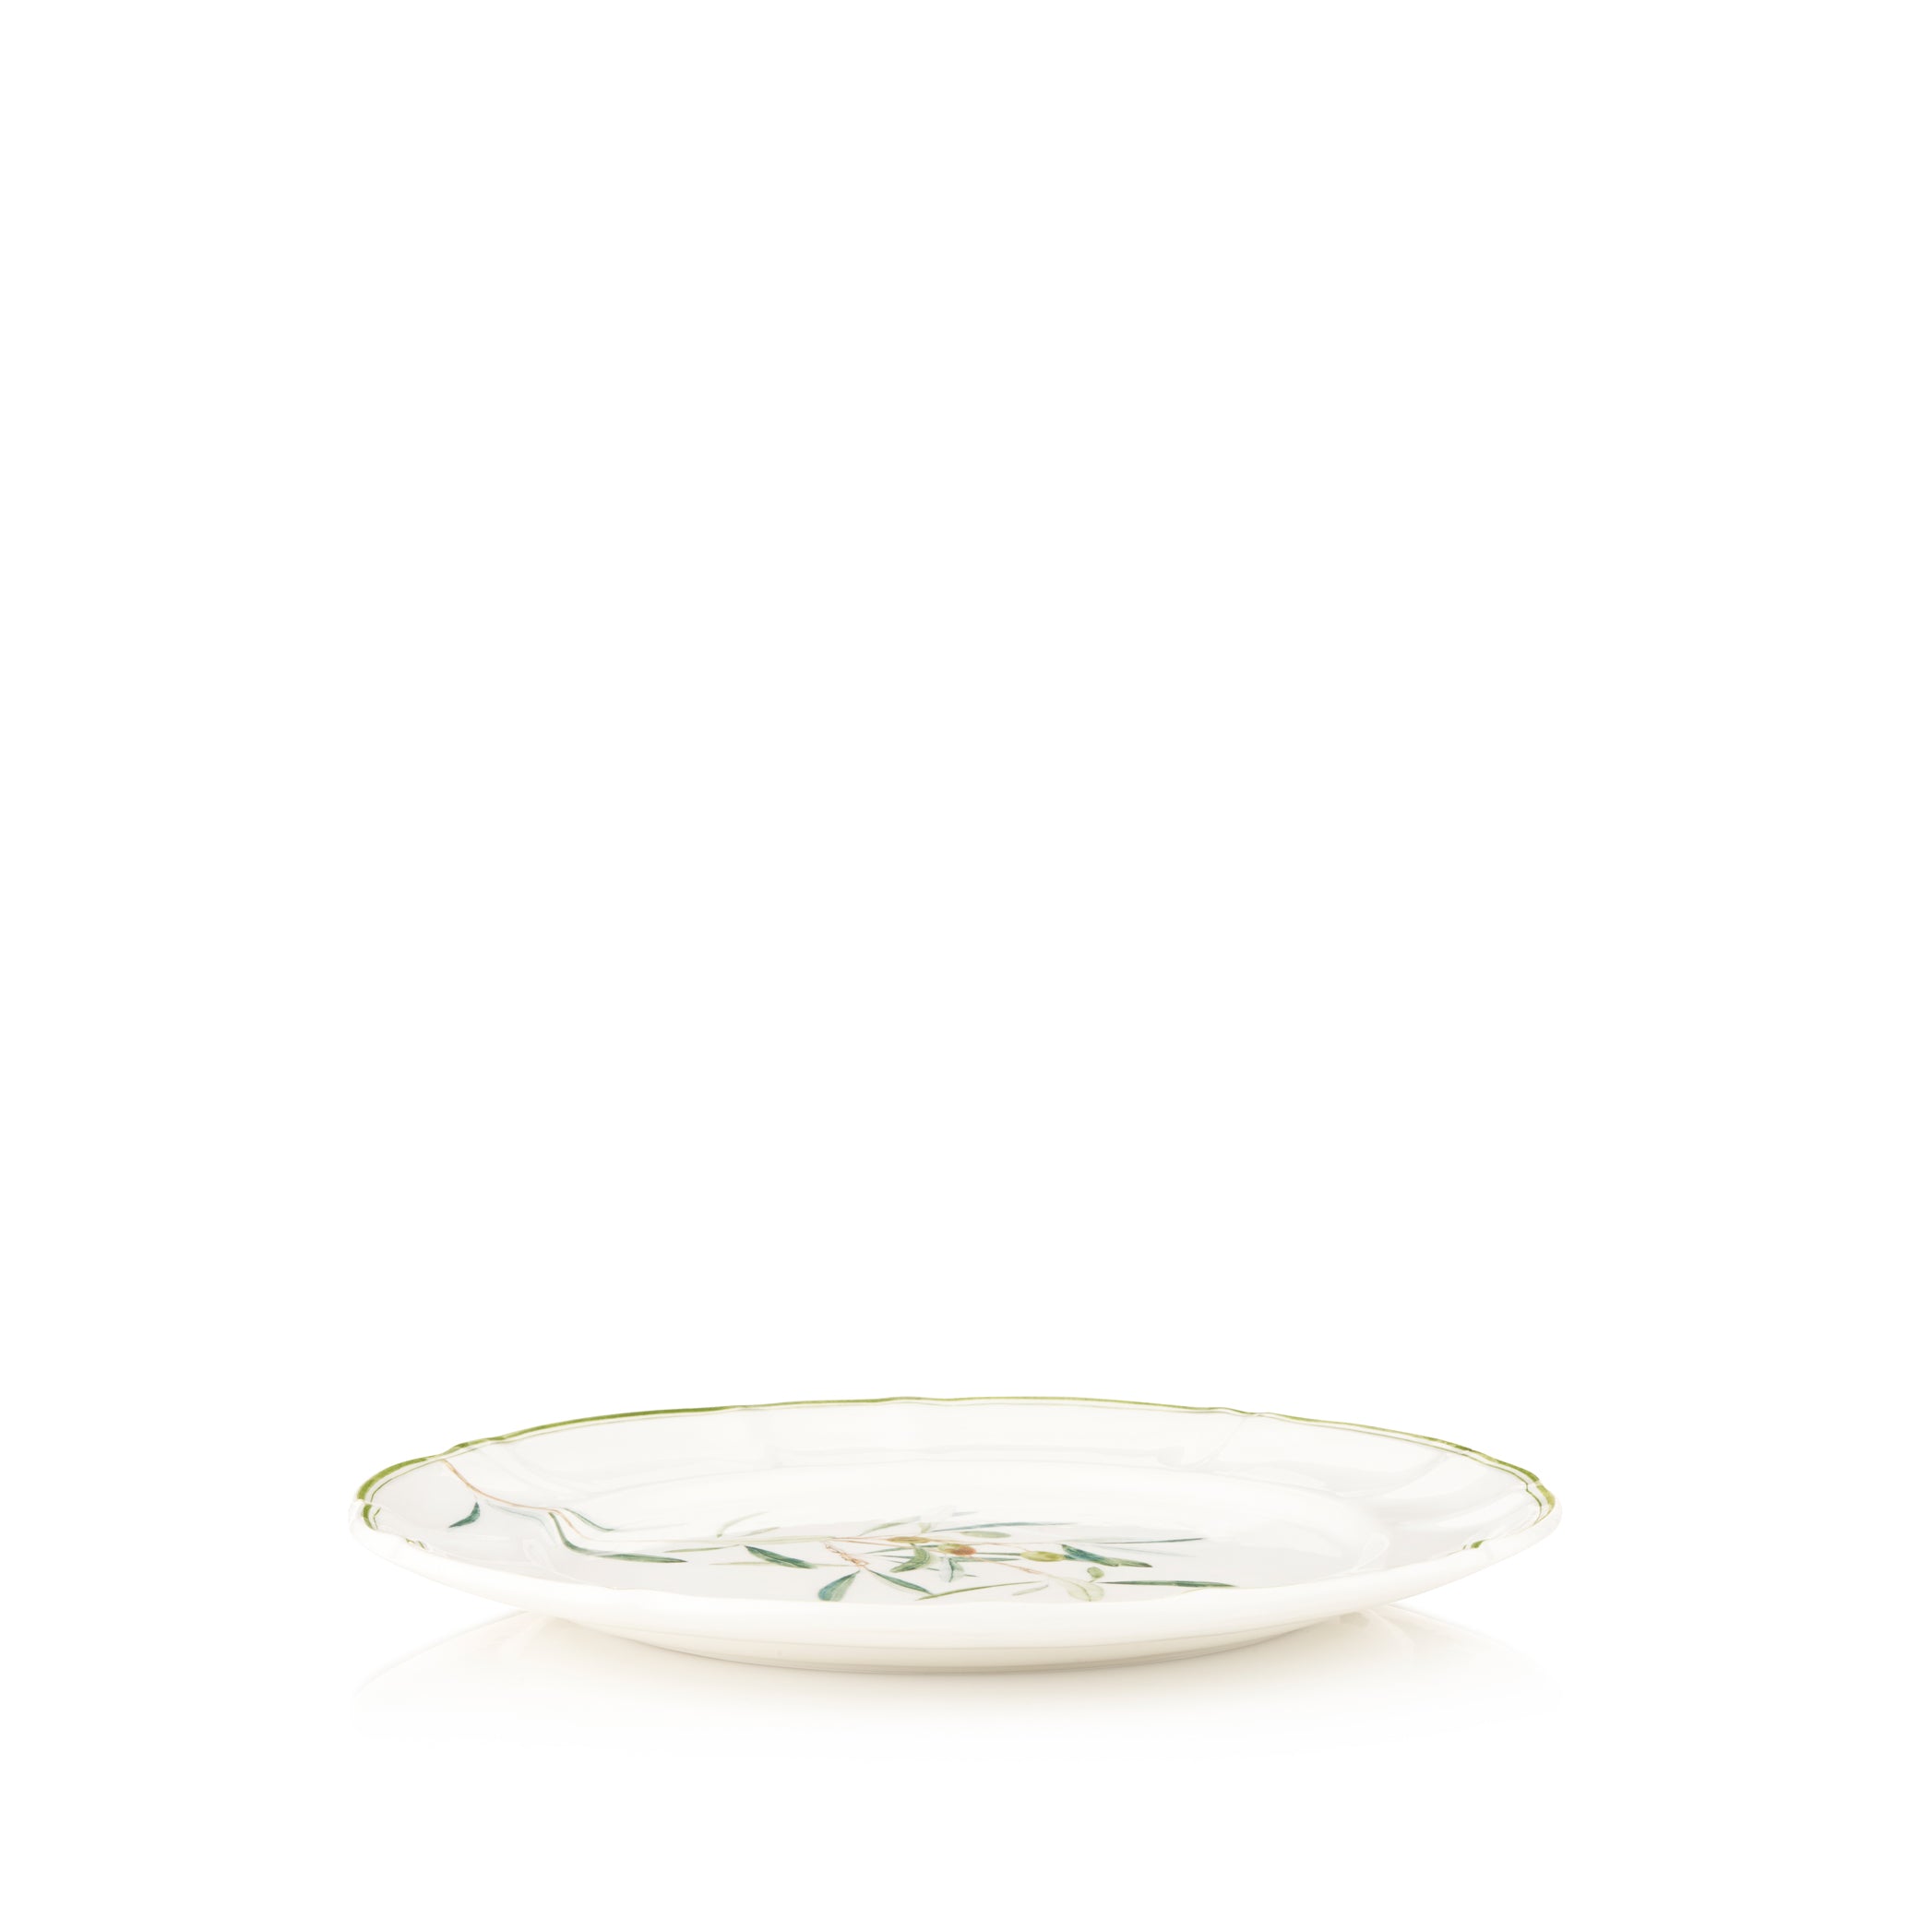 Olive Branch Scalloped Dinner Plate With Small Insect, 26cm